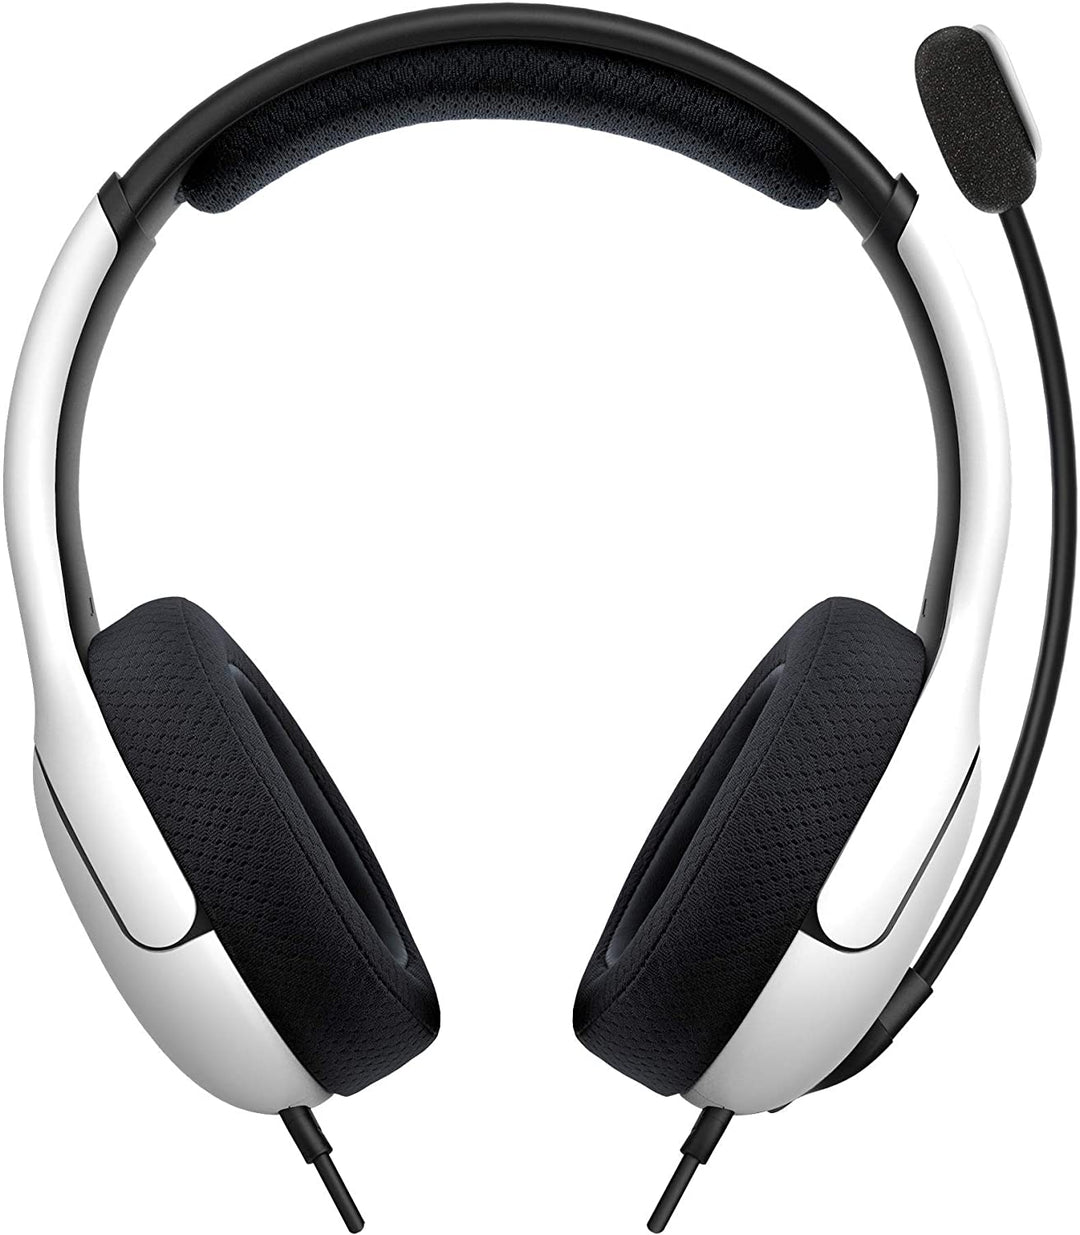 PDP Headset LVL40 Stereo Xbox - Serie XIS Weiß